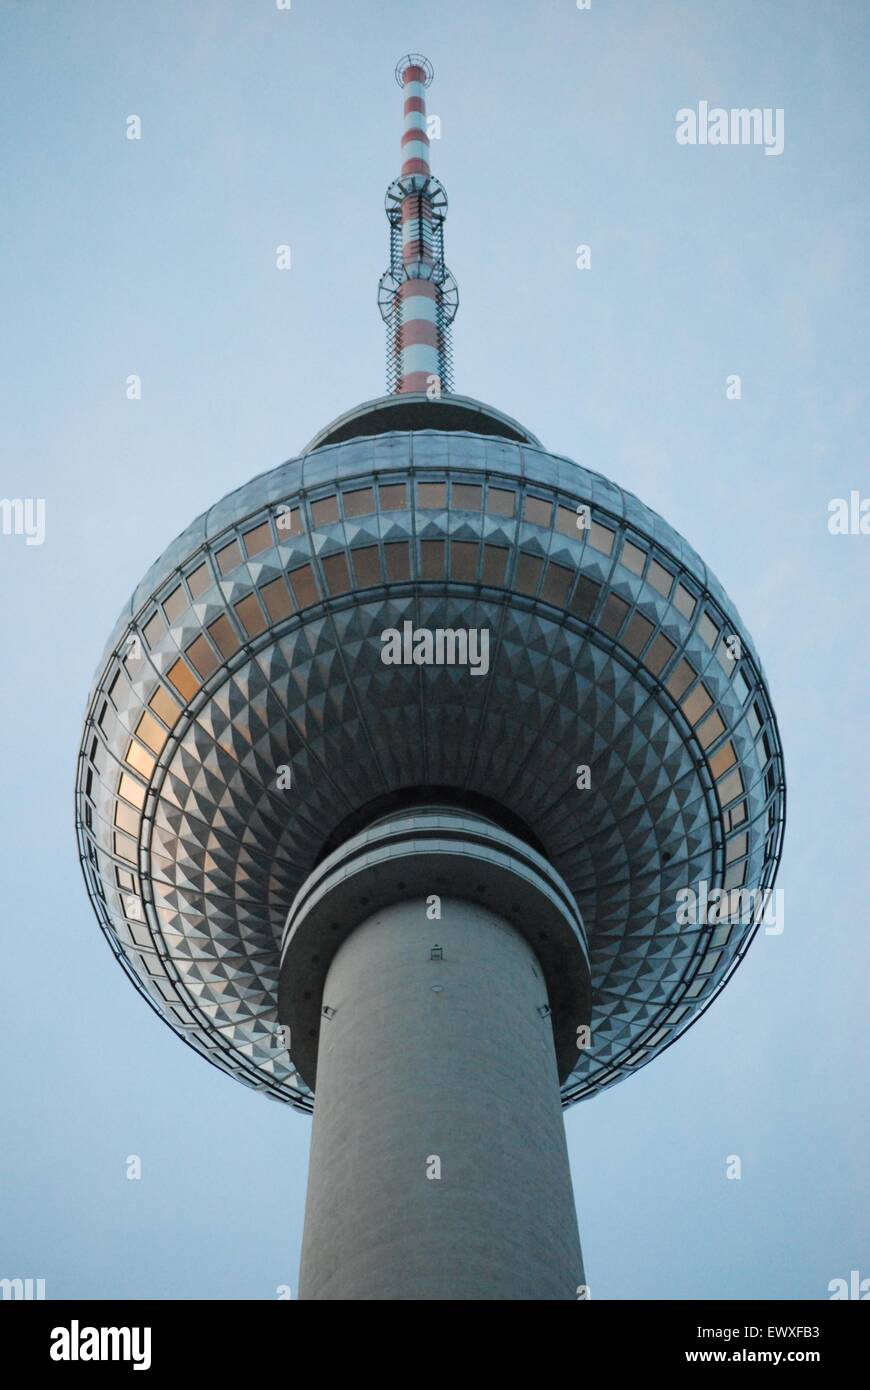 Sphere at the top of the Berlin Television Tower, Germany Stock Photo